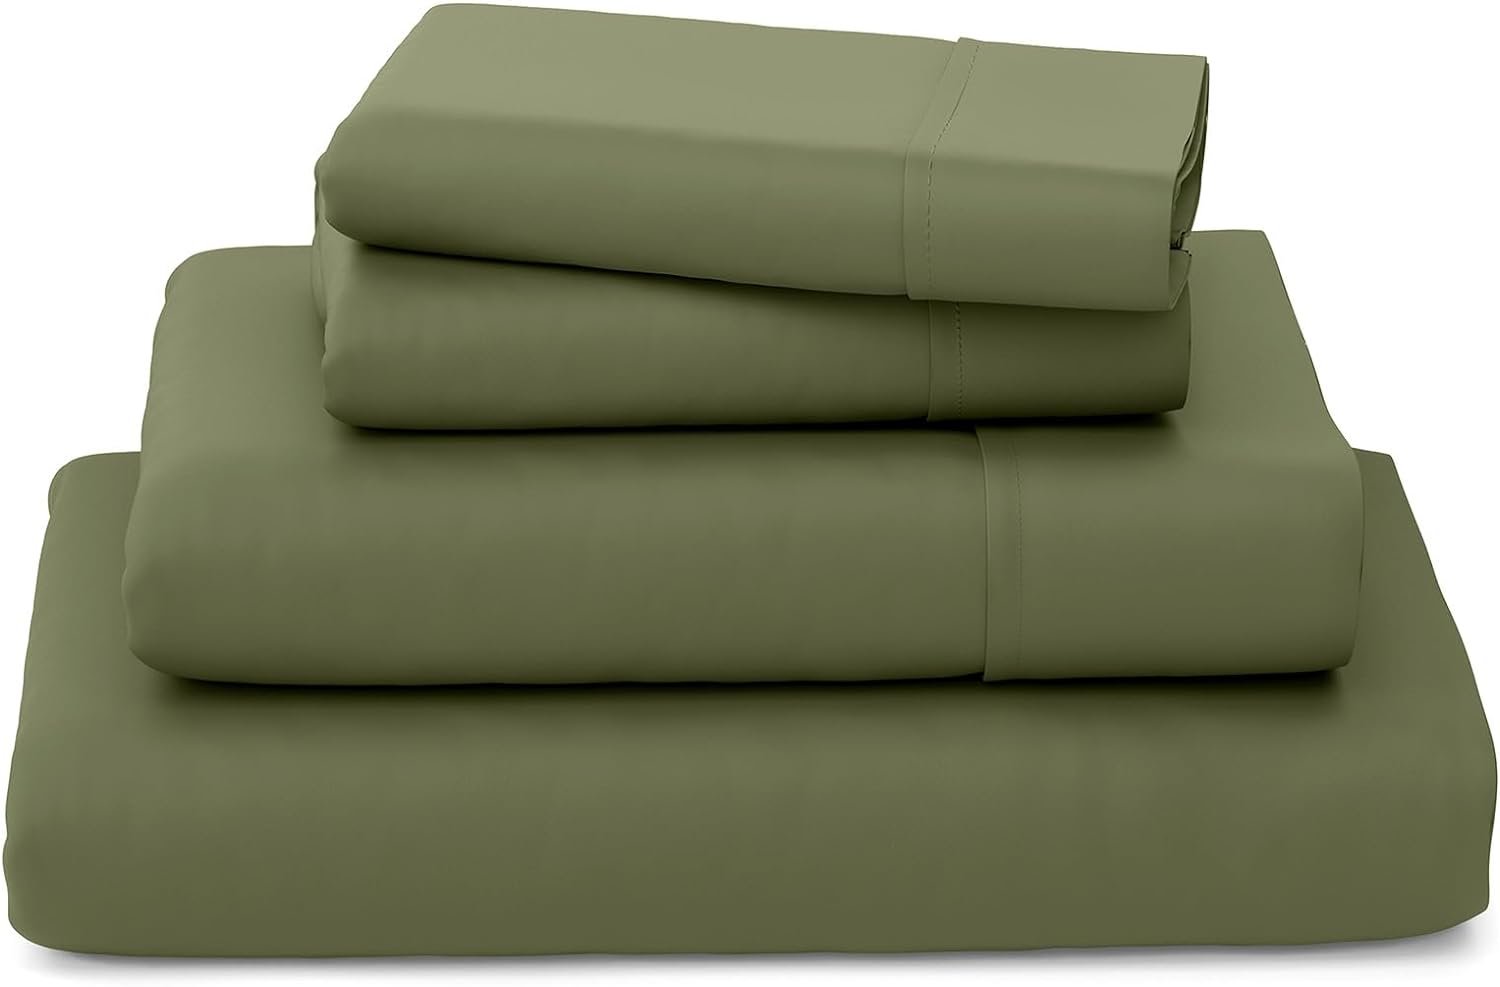 Cosy House Collection Luxury Bamboo Bed Sheet Set - Bedding Blend from Natural Bamboo Fiber - Resists Wrinkles - 4 Piece - 1 Fitted Sheet, 1 Flat, 2 Pillowcases - King, Sage Green